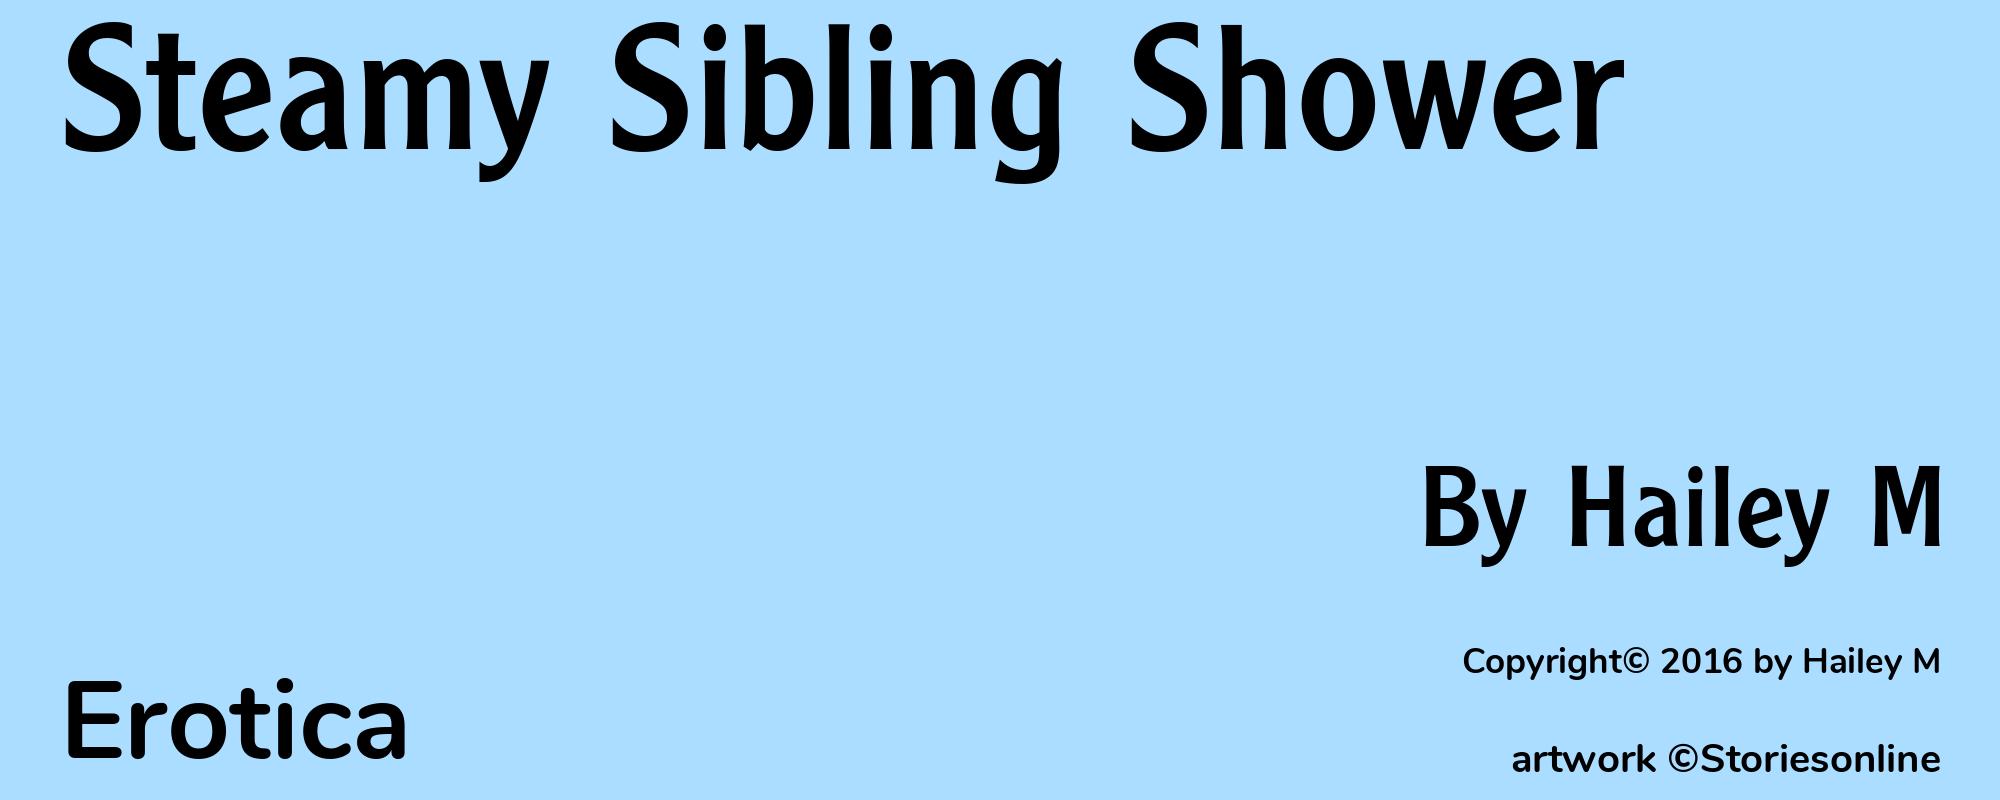 Steamy Sibling Shower - Cover